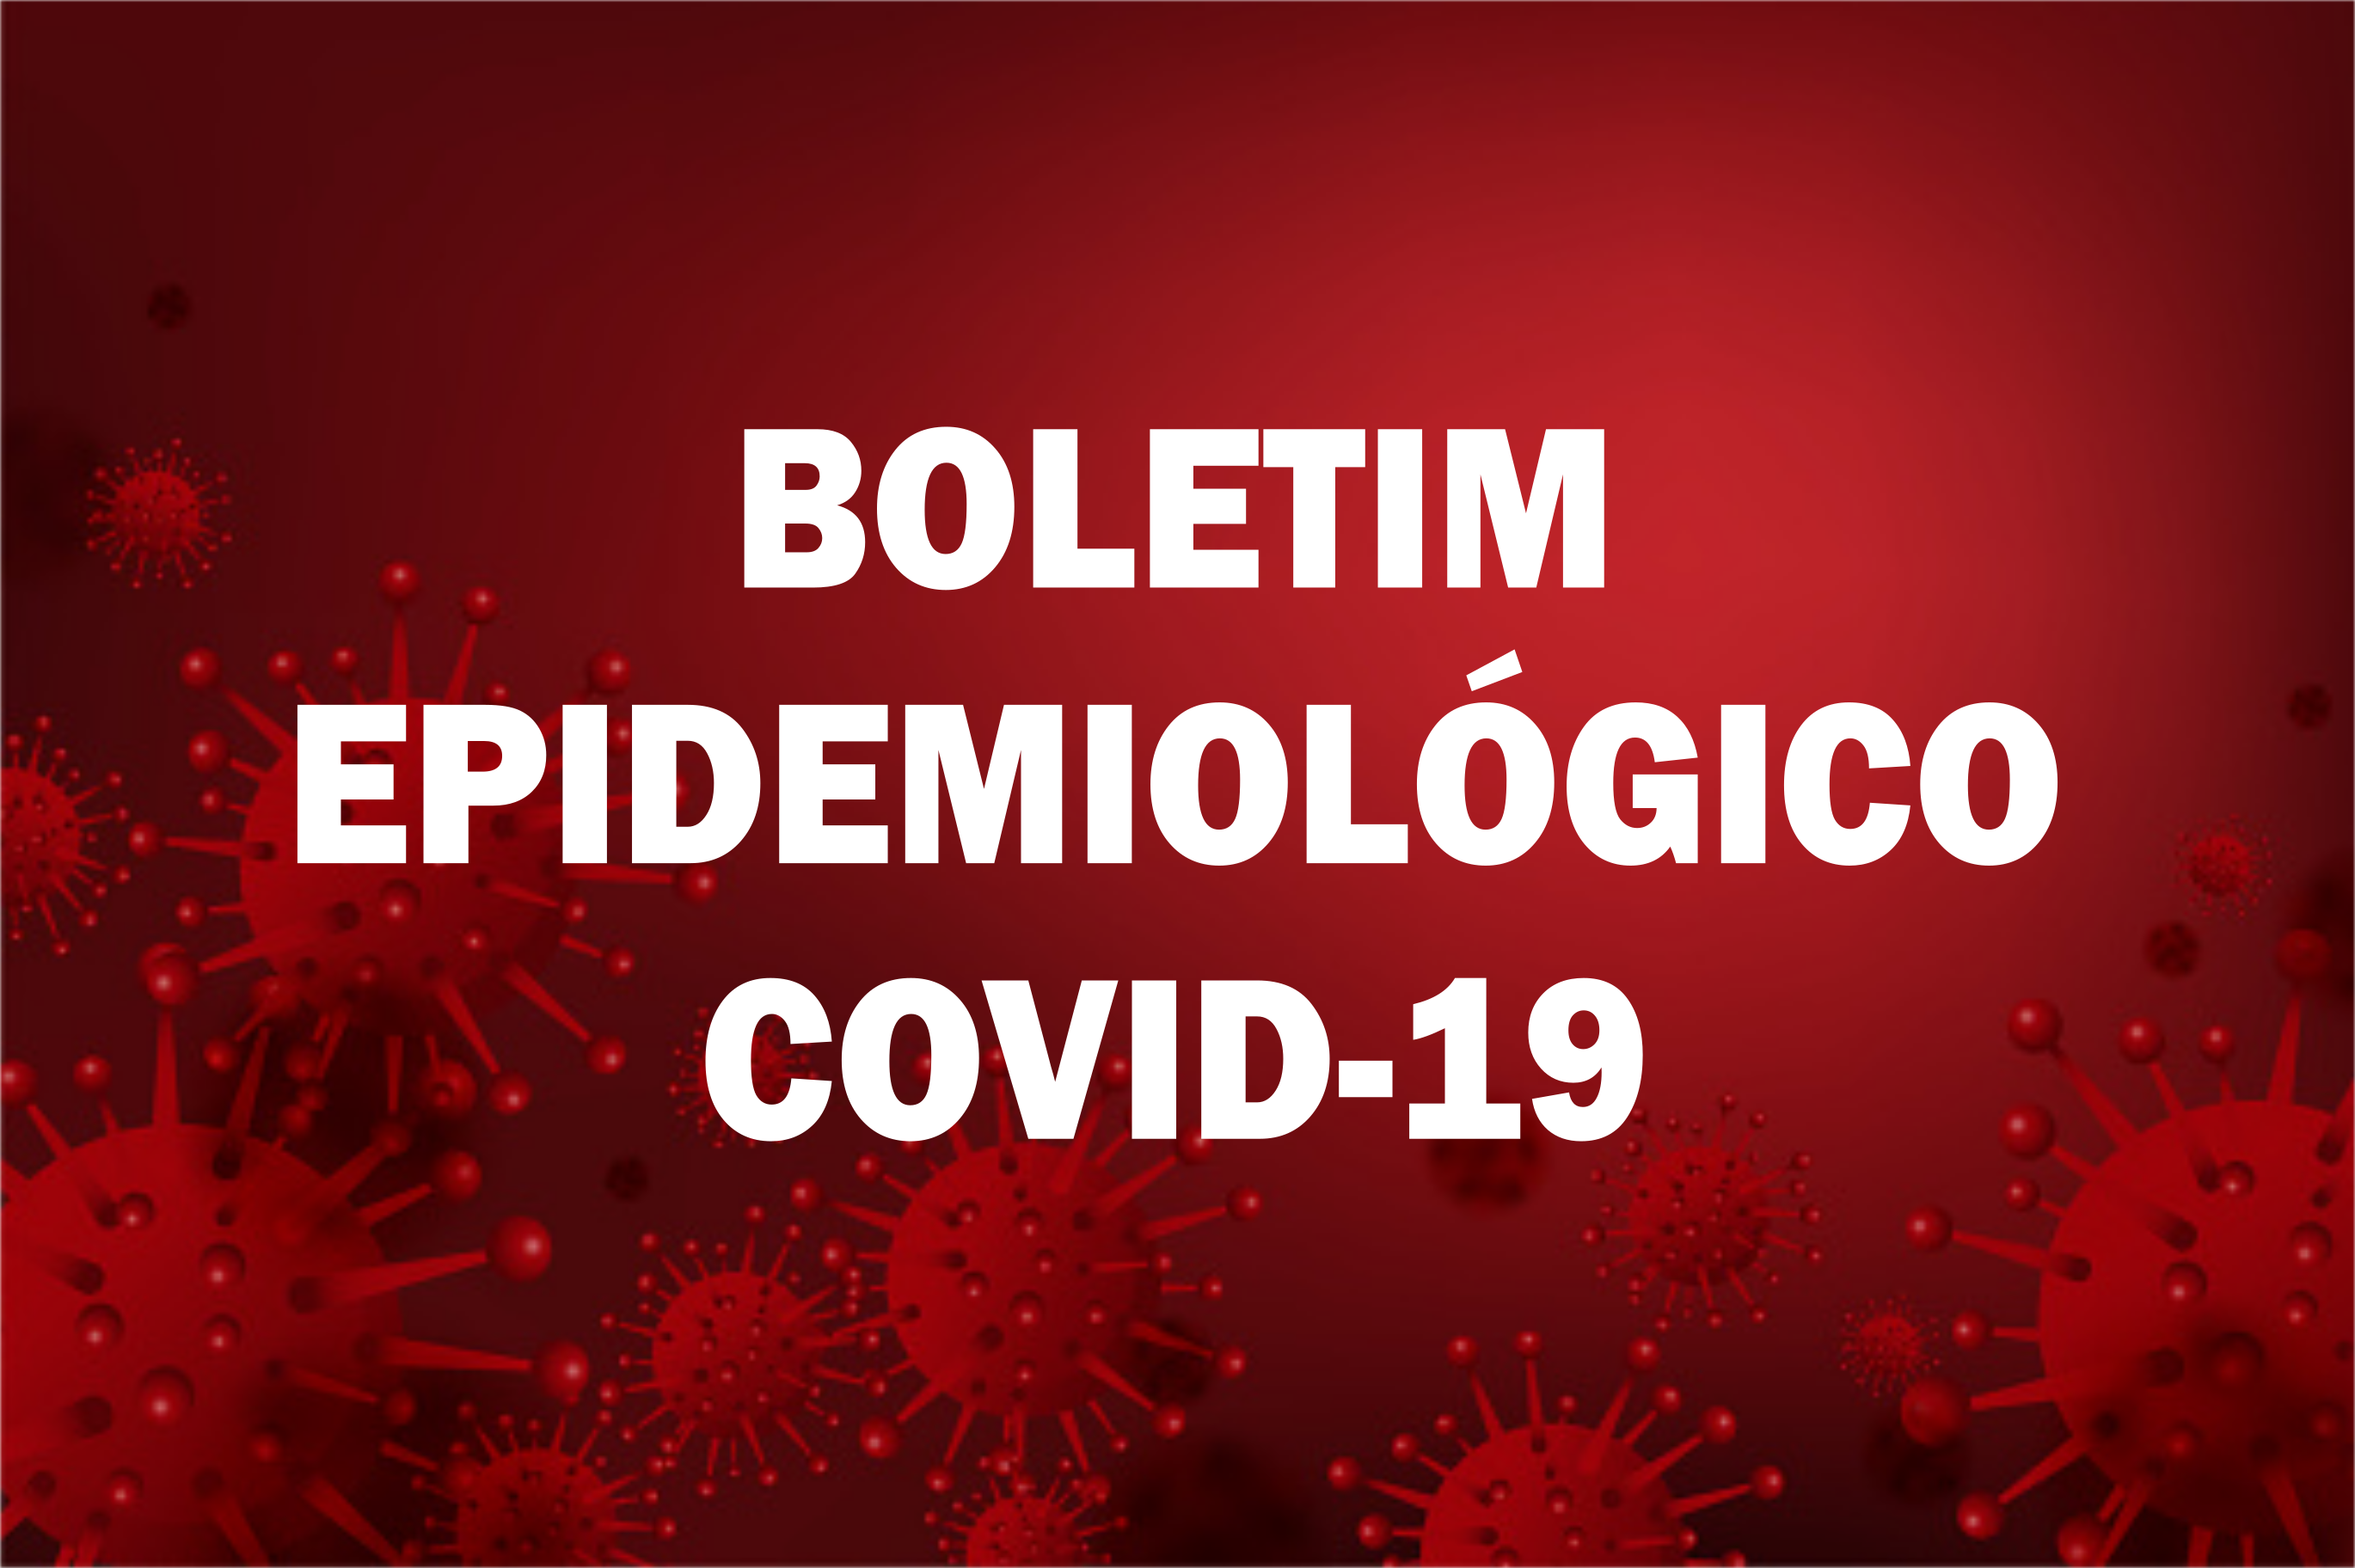 You are currently viewing BOLETIM EPIDEMIOLÓGICO Nº 155 (COVID-19)